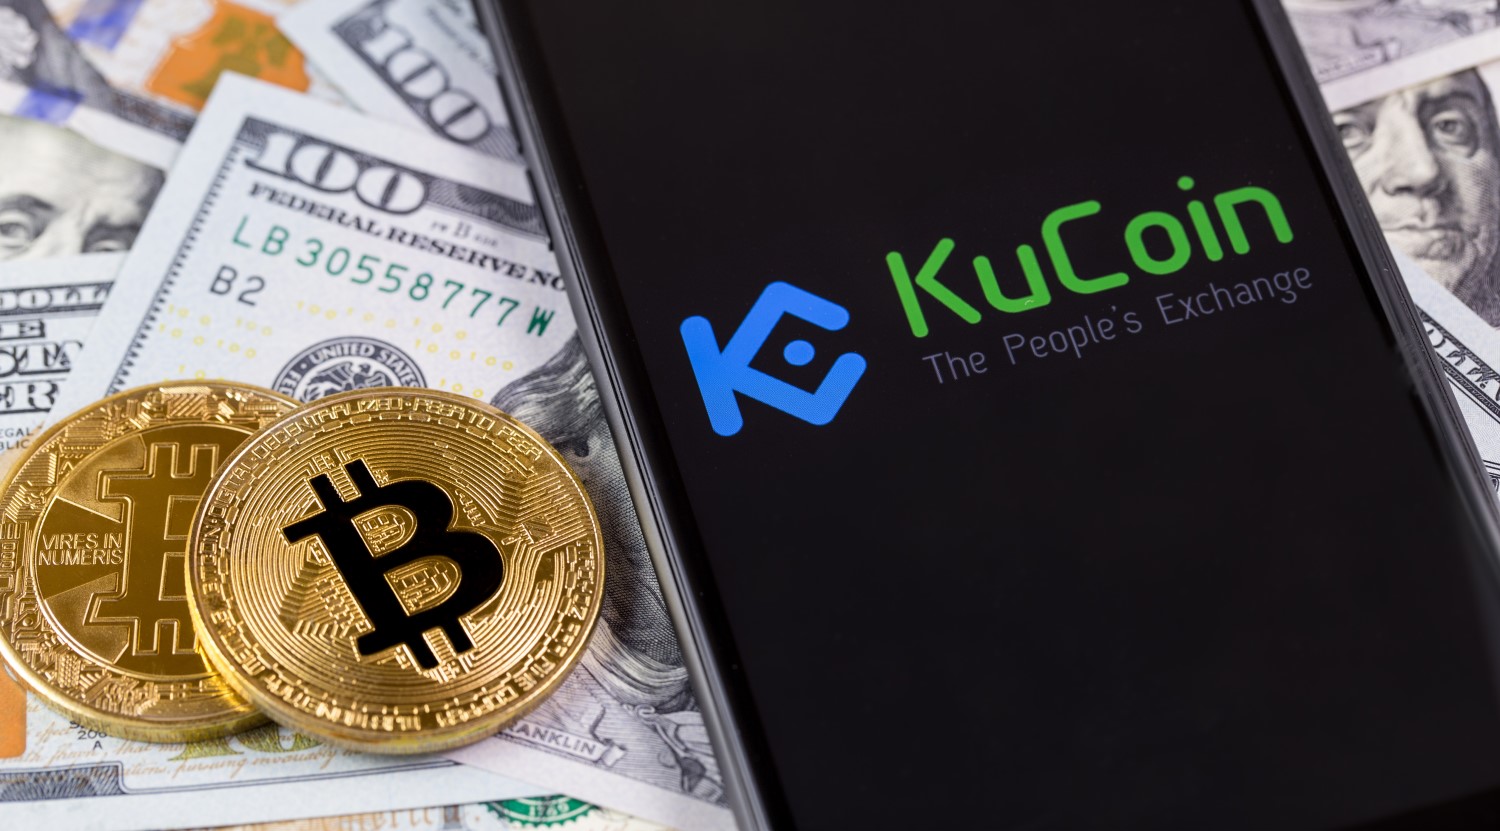 Reddit User Calls Out KuCoin Over ≈$50,000 Stuck On Exchange